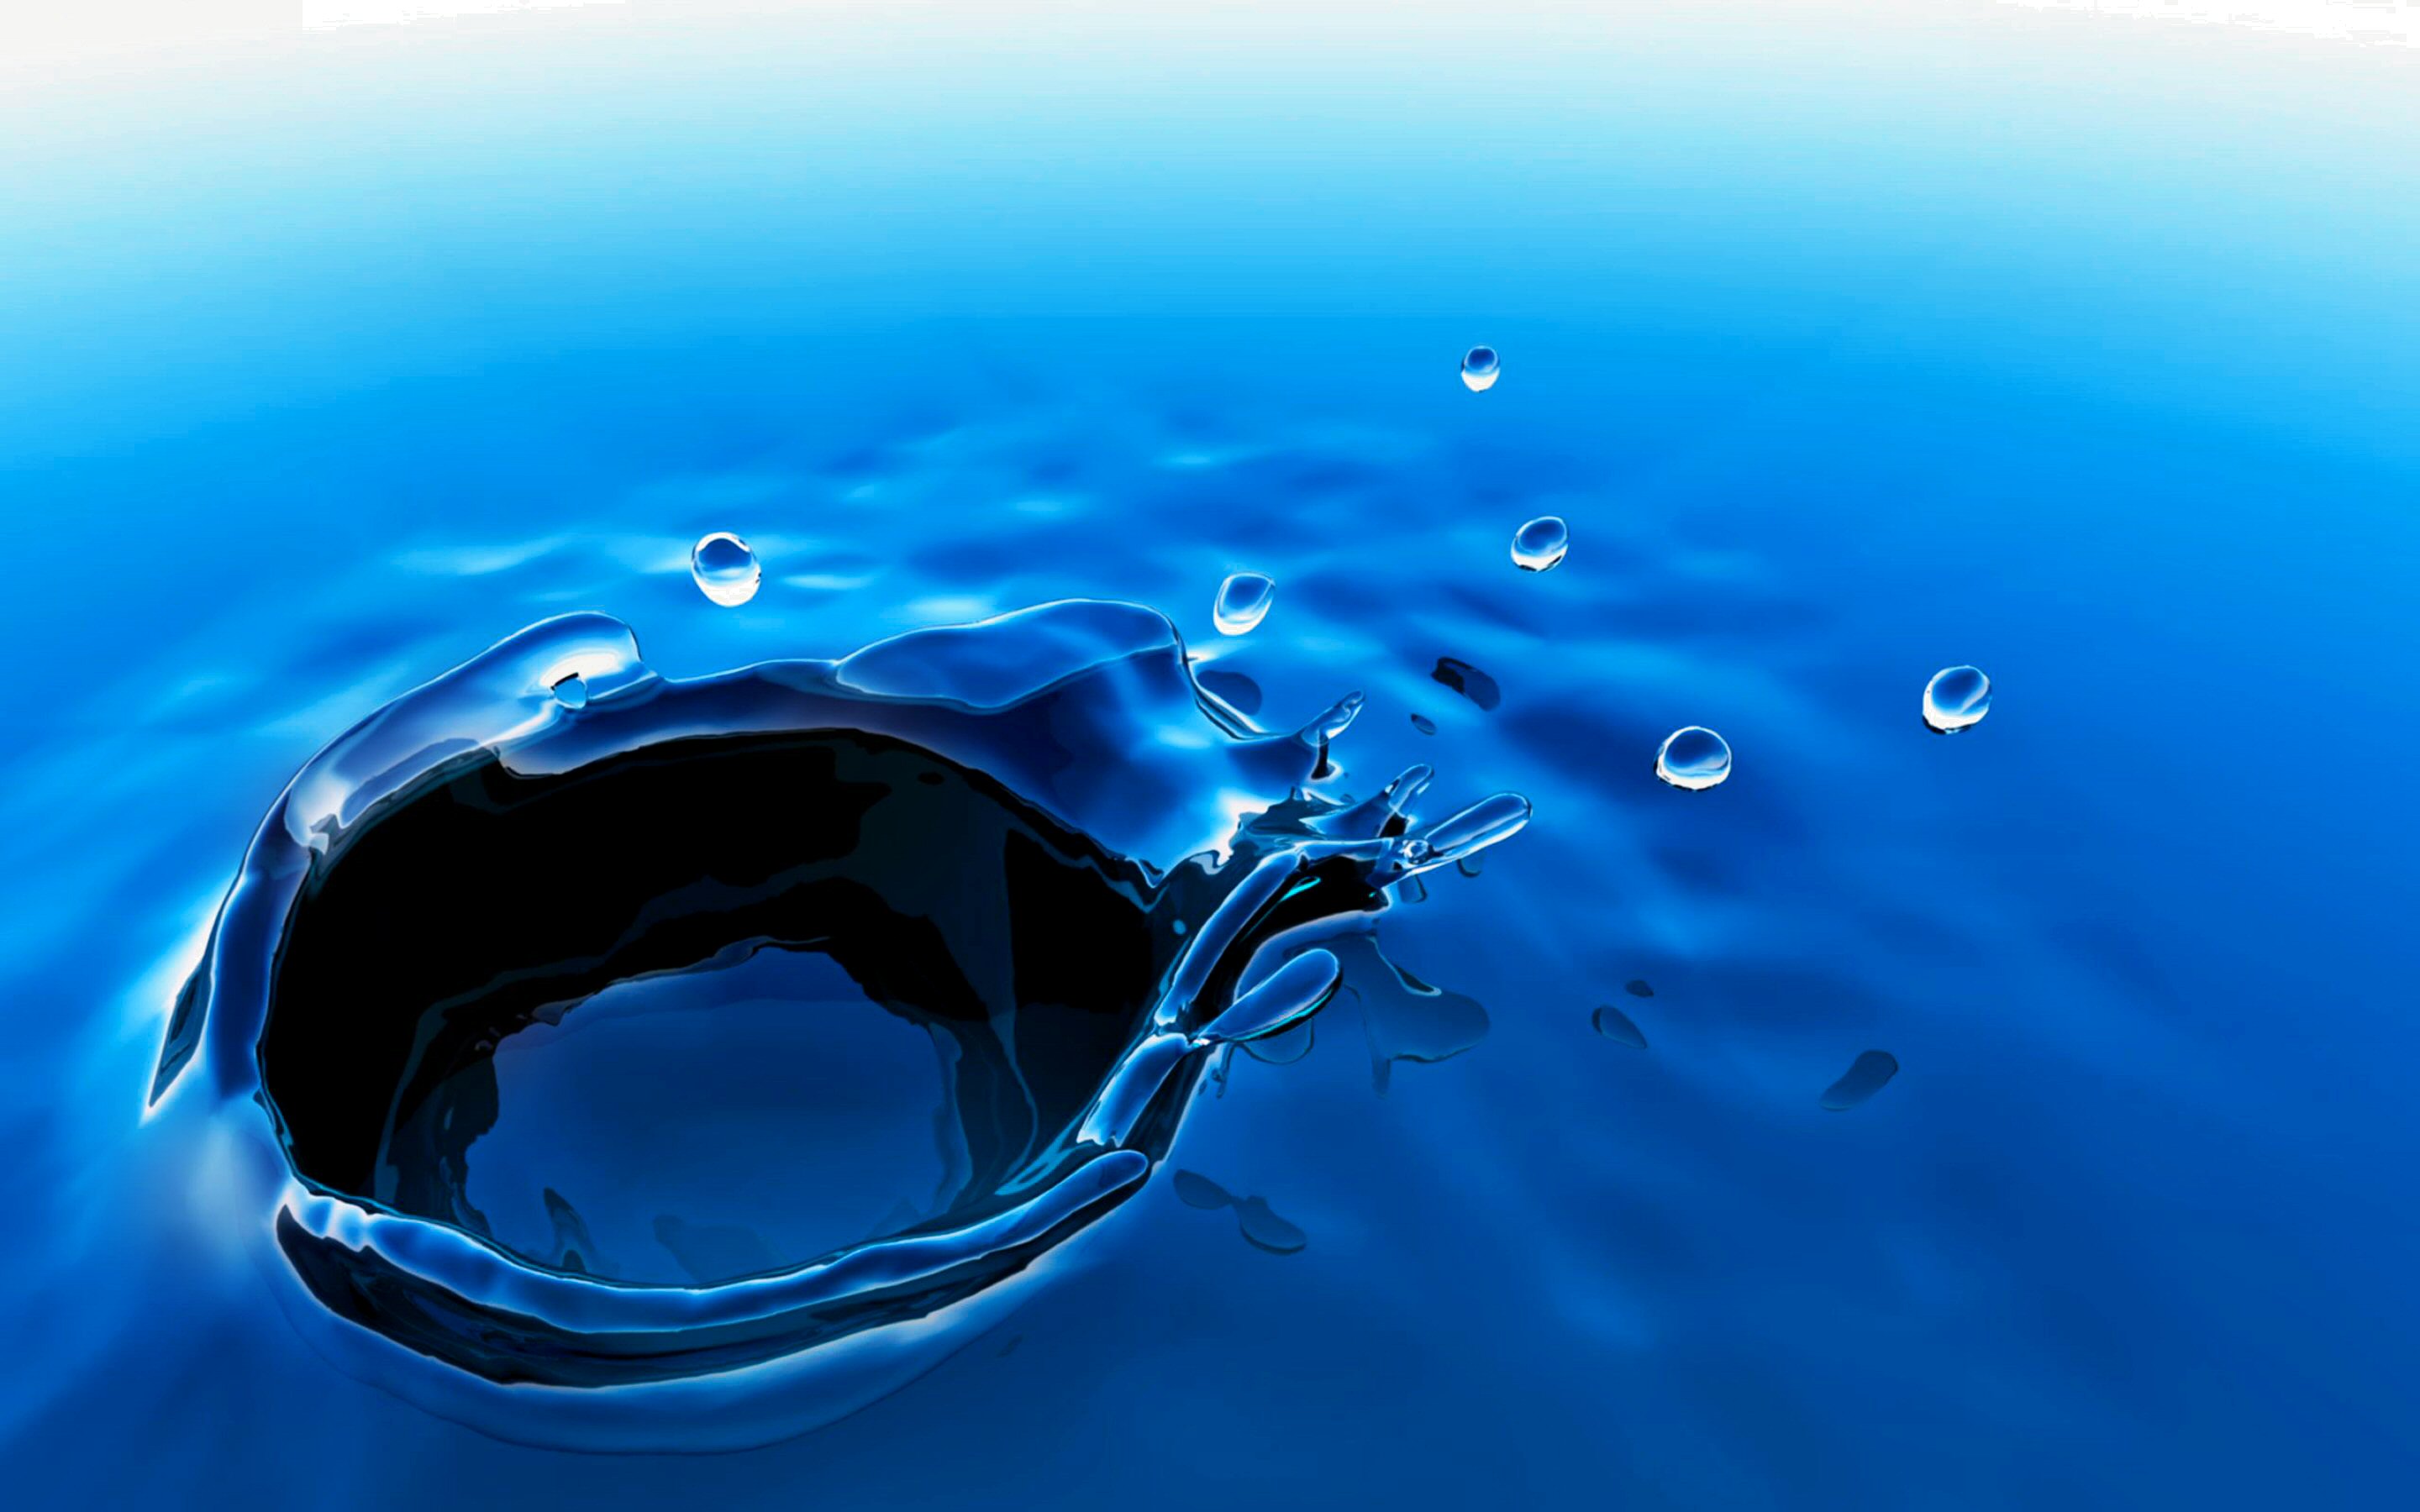 Water Wallpapers 35 - [2880 x 1800]